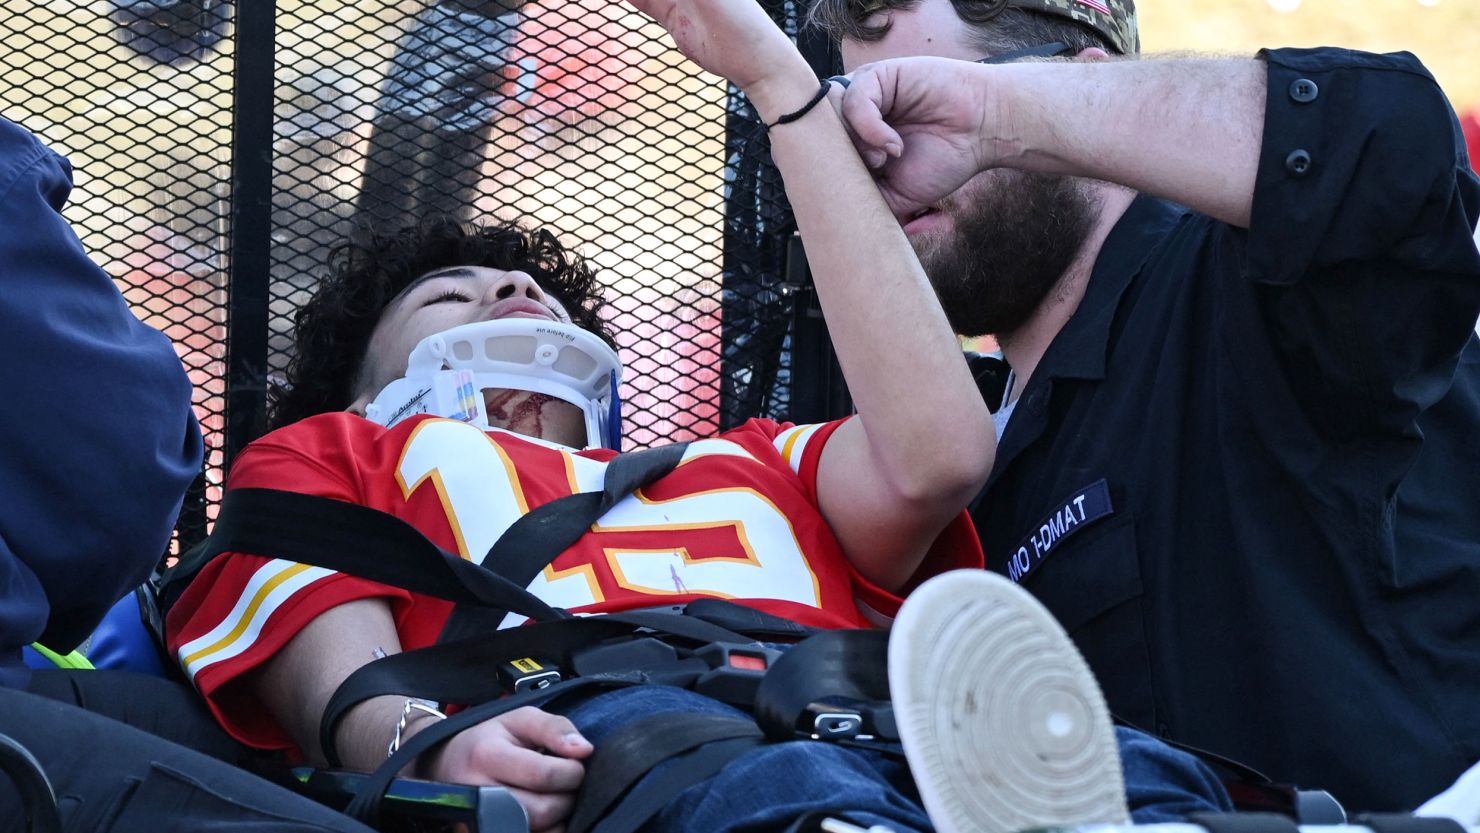 An injured person is aided near the Kansas City Chiefs' Super Bowl LVIII victory parade on February 14, 2024, in Kansas City, Missouri. Shots were reportedly fired during the parade, according to police. (Photo by Andrew CABALLERO-REYNOLDS / AFP) (Photo by ANDREW CABALLERO-REYNOLDS/AFP via Getty Images)